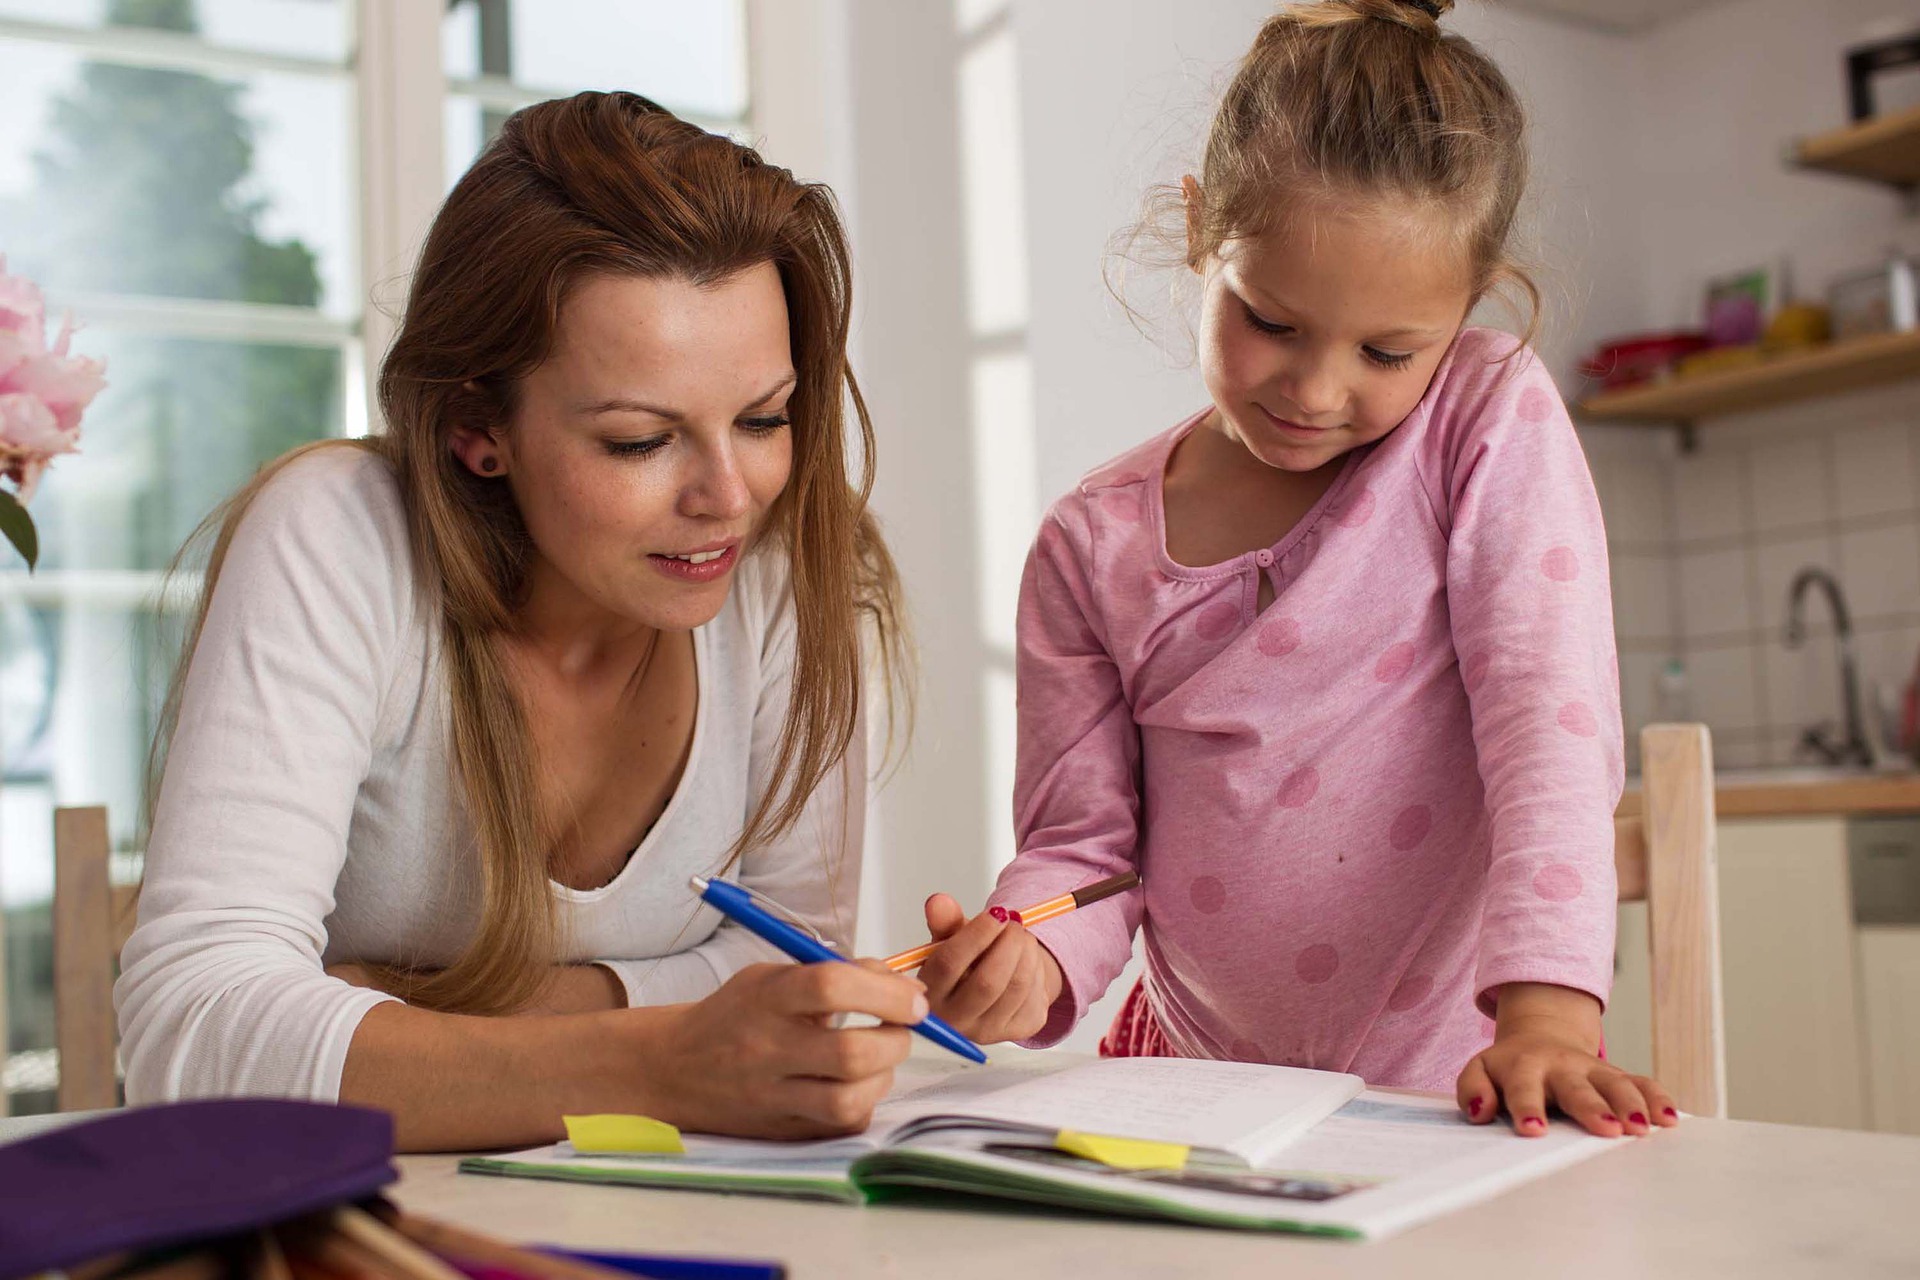 What are the most important things a parent can teach a child?